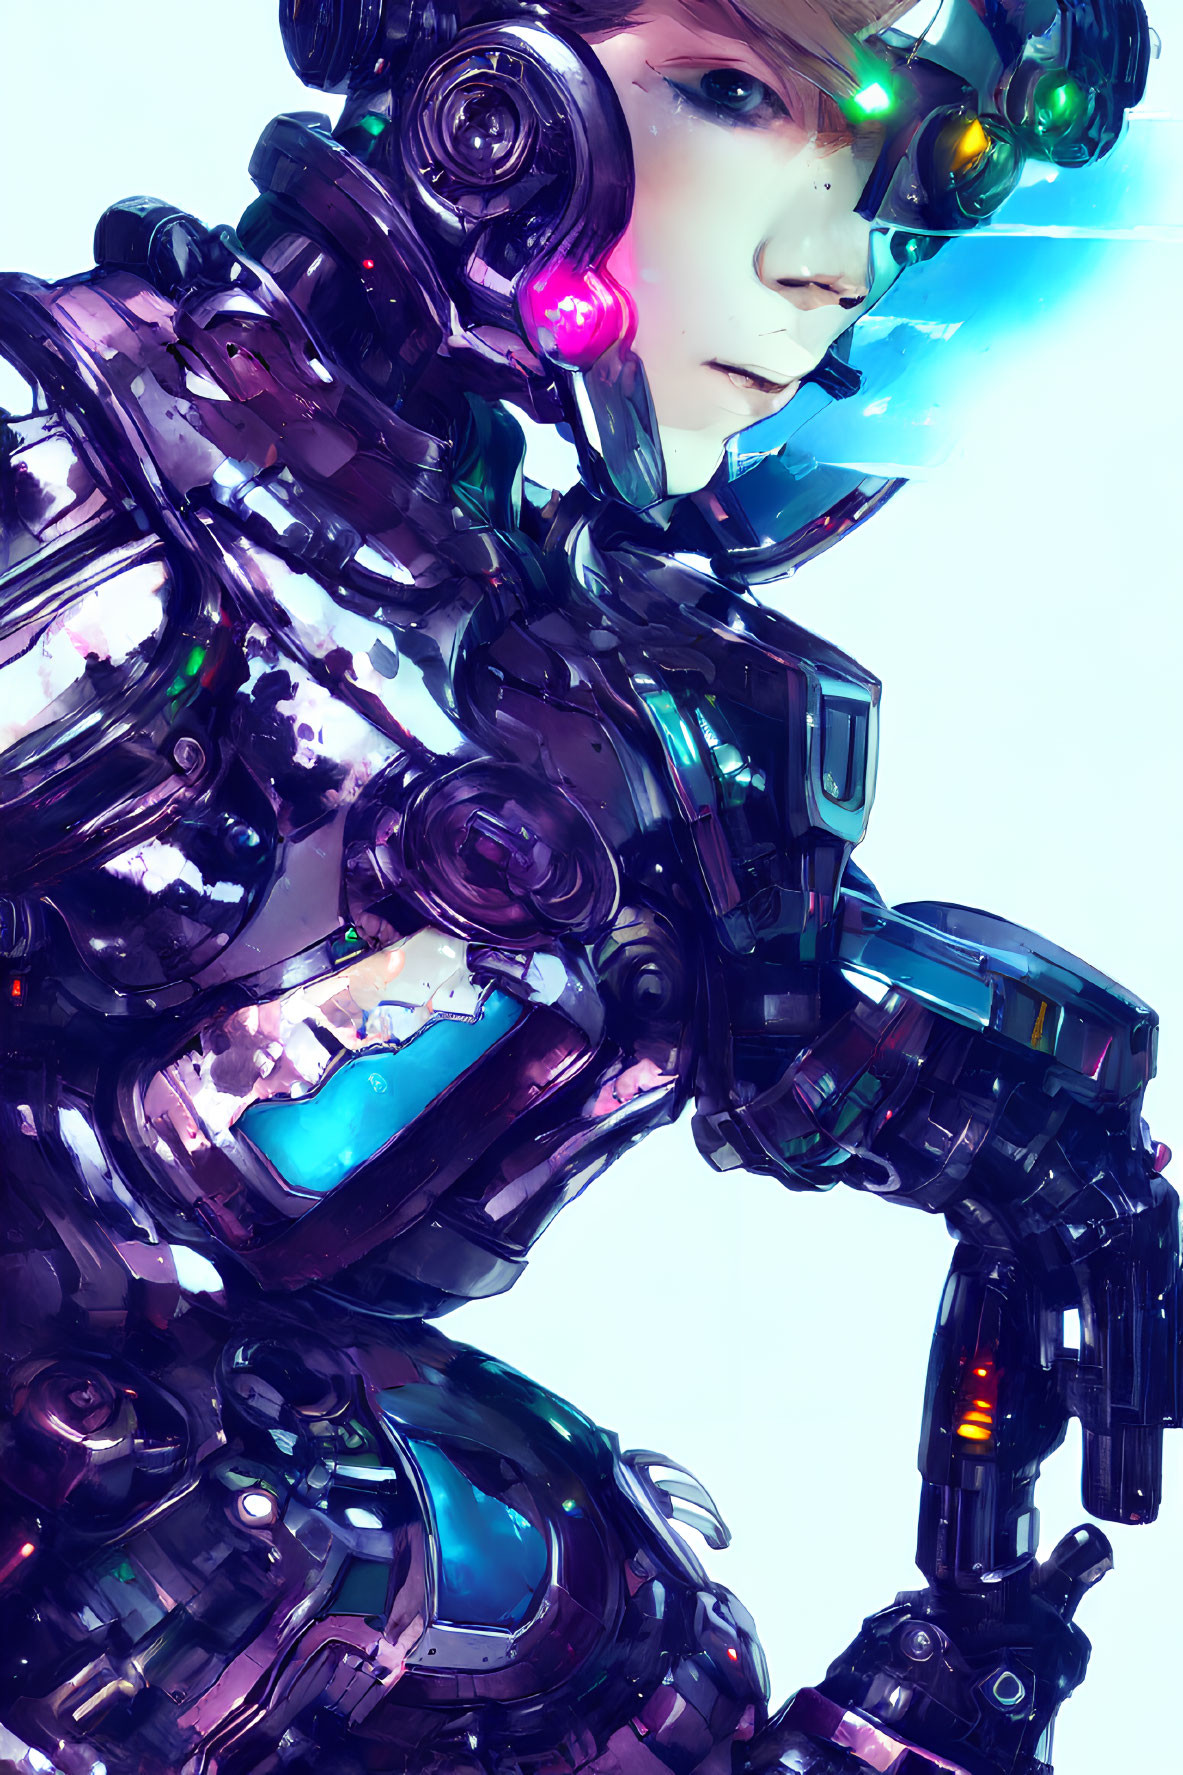 Detailed Female Cyborg in Advanced Mechanical Suit and Glowing Elements